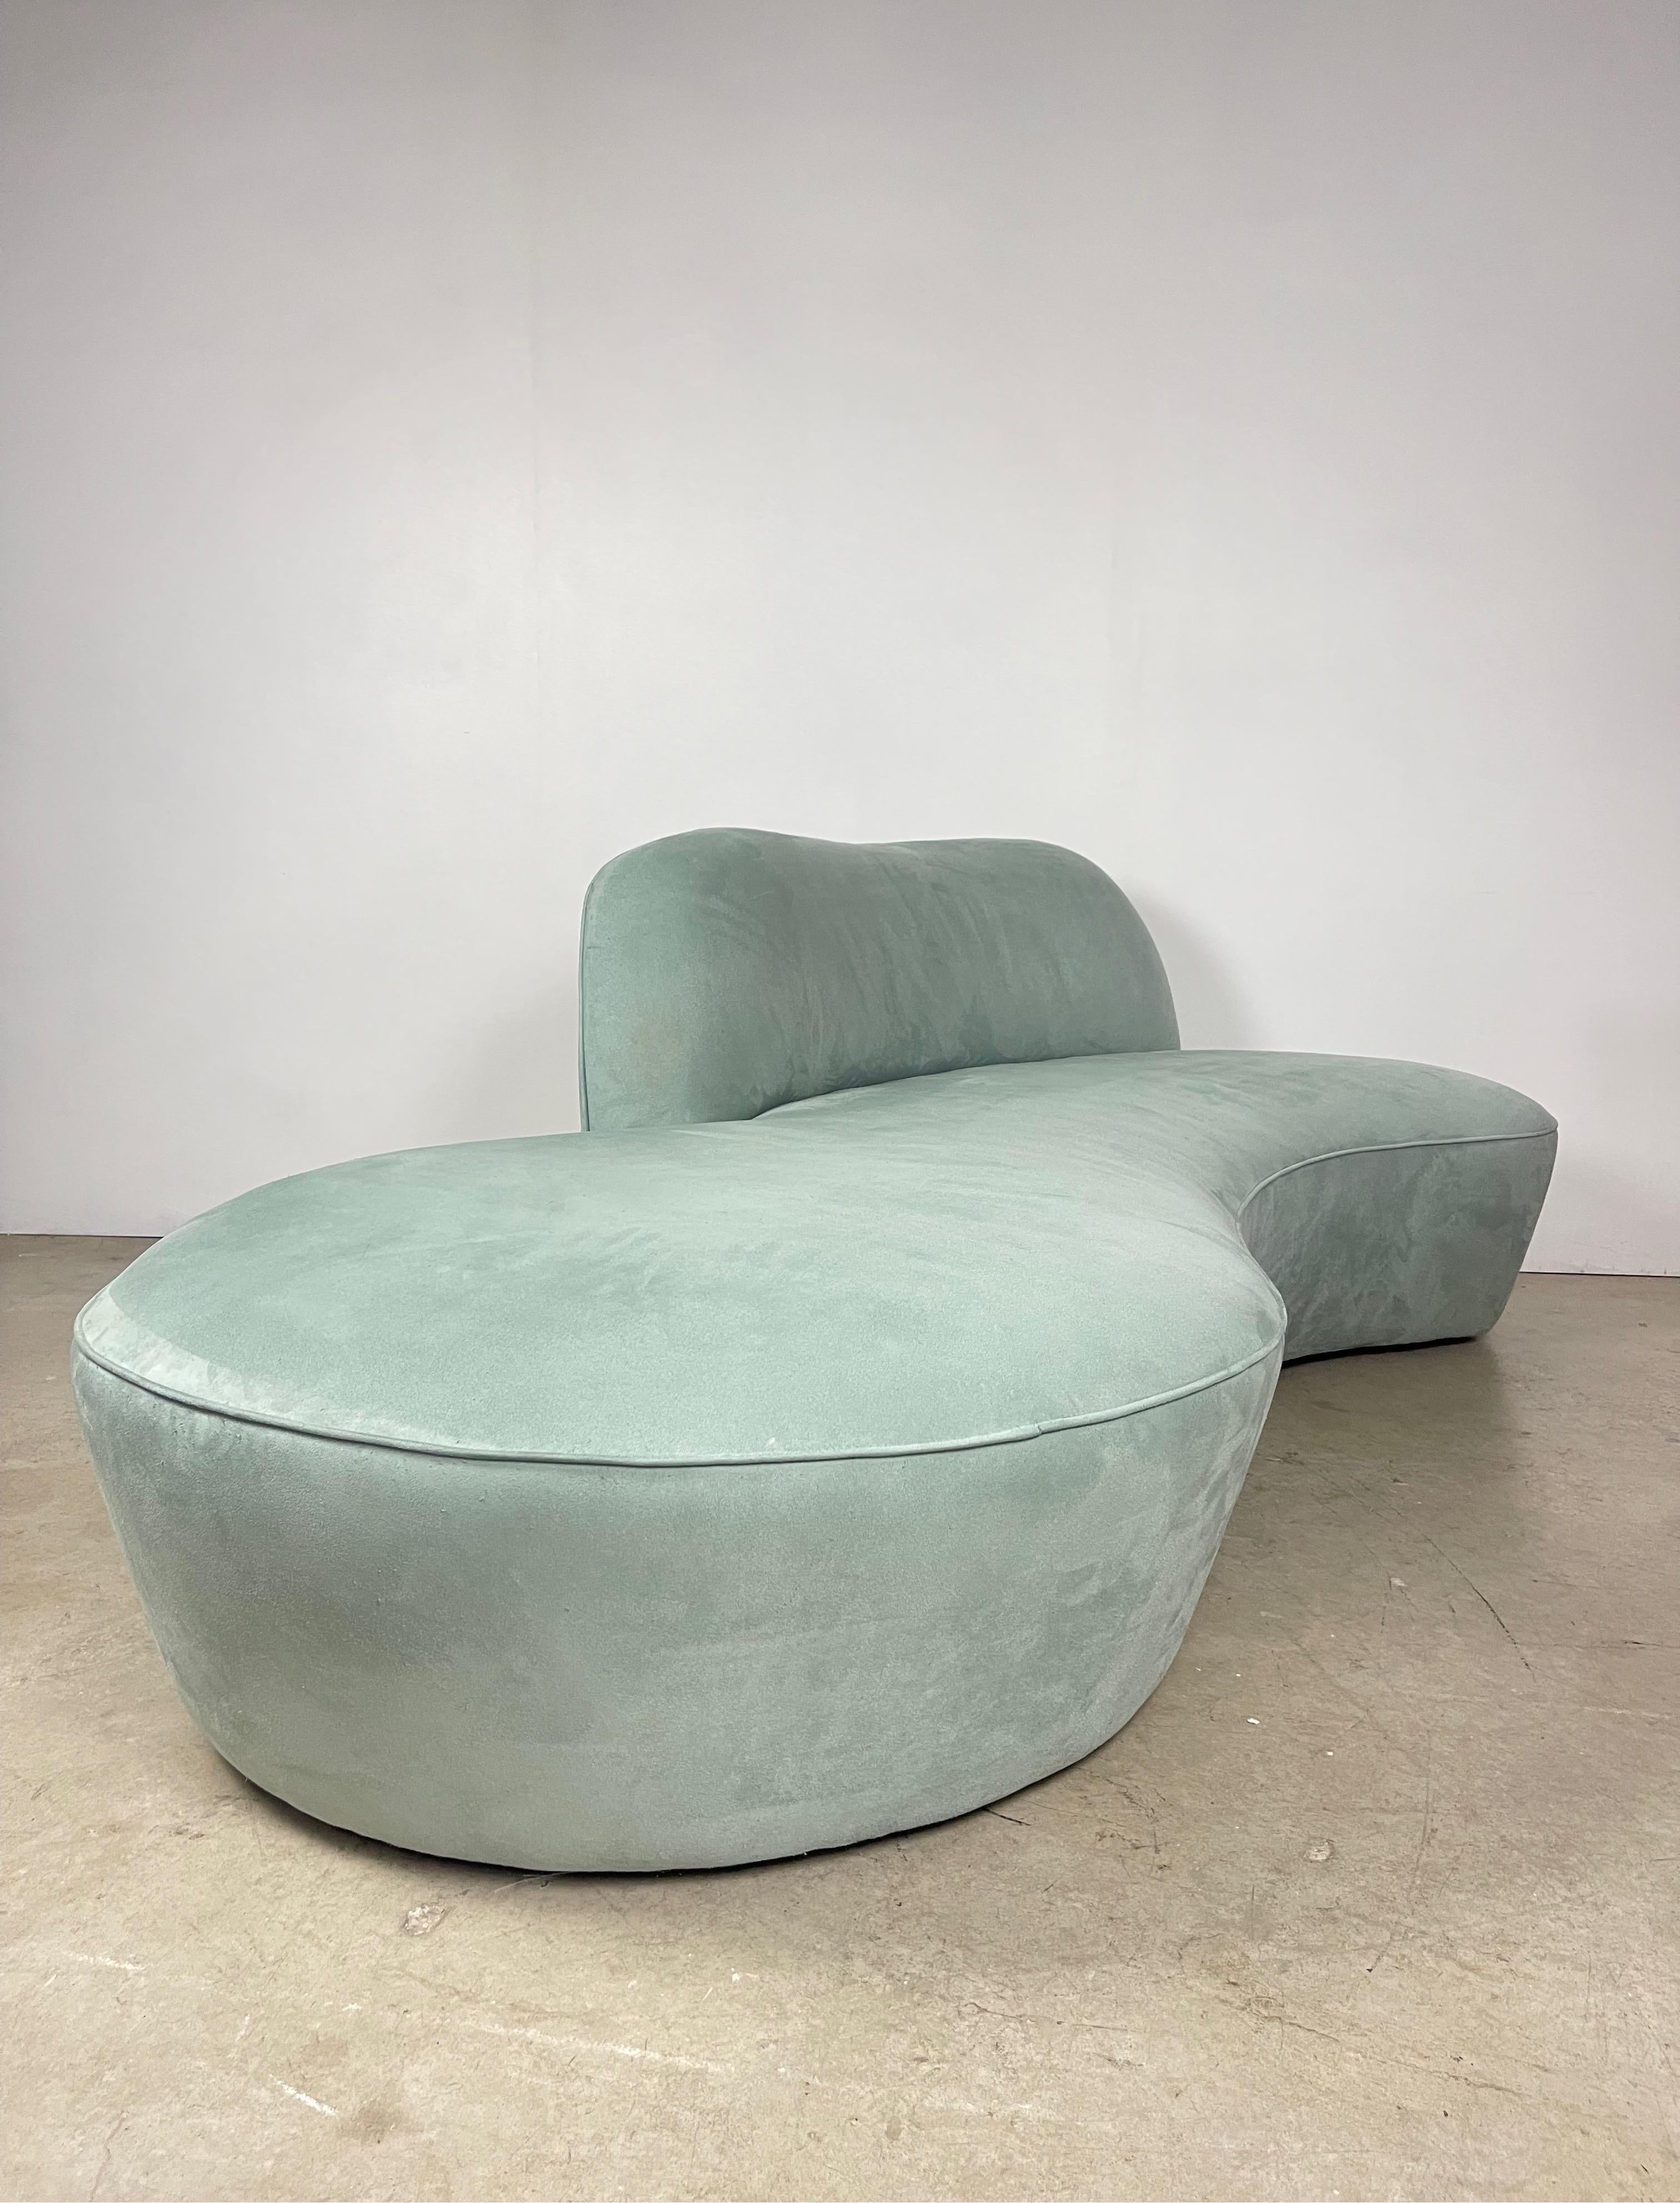 This is an authentic Vladimir Kagan Zoe sofa, one of his most iconic designs. The sofa features a curved shape that is both elegant and comfortable. Retains the original upholstery- recommended to be replaced as it shows wear and discoloration.